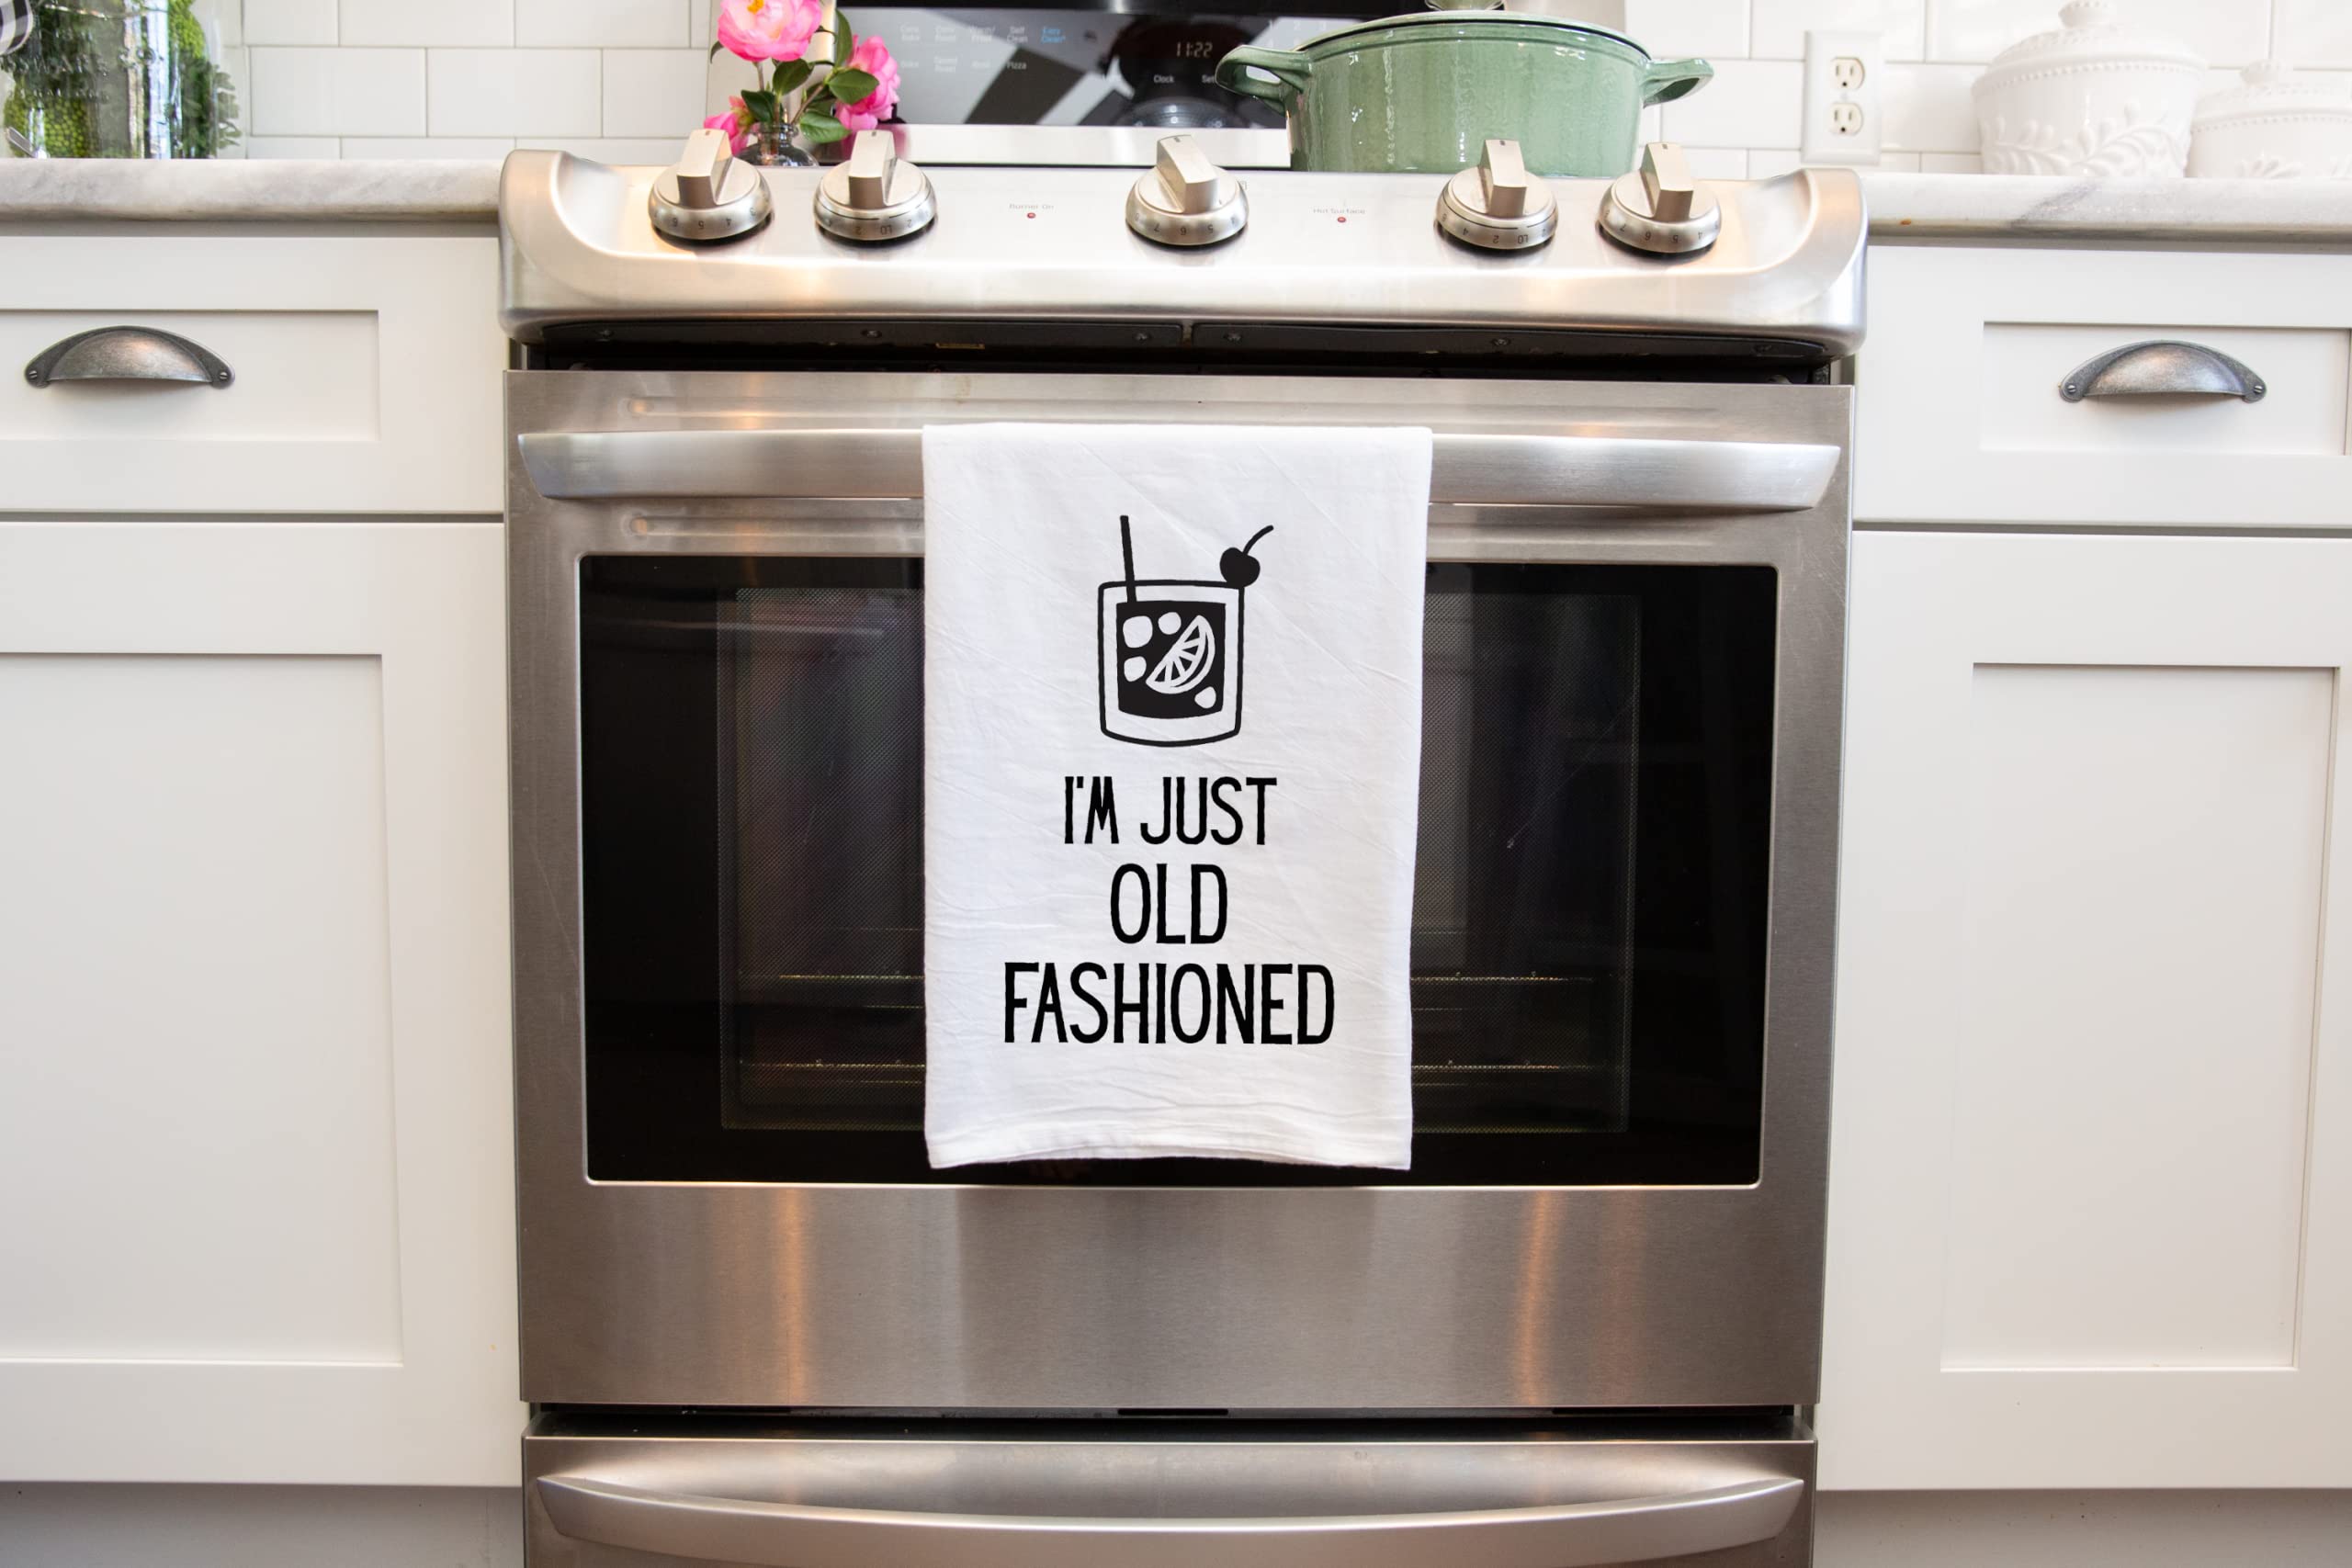 Handmade Funny Kitchen Towel - 100% Cotton Funny Old Fashion Bar Towel for Kitchen - 28x28 Inch Perfect for Hostess Housewarming Christmas Mother’s Day Birthday Gift (I’m Just Old Fashioned)